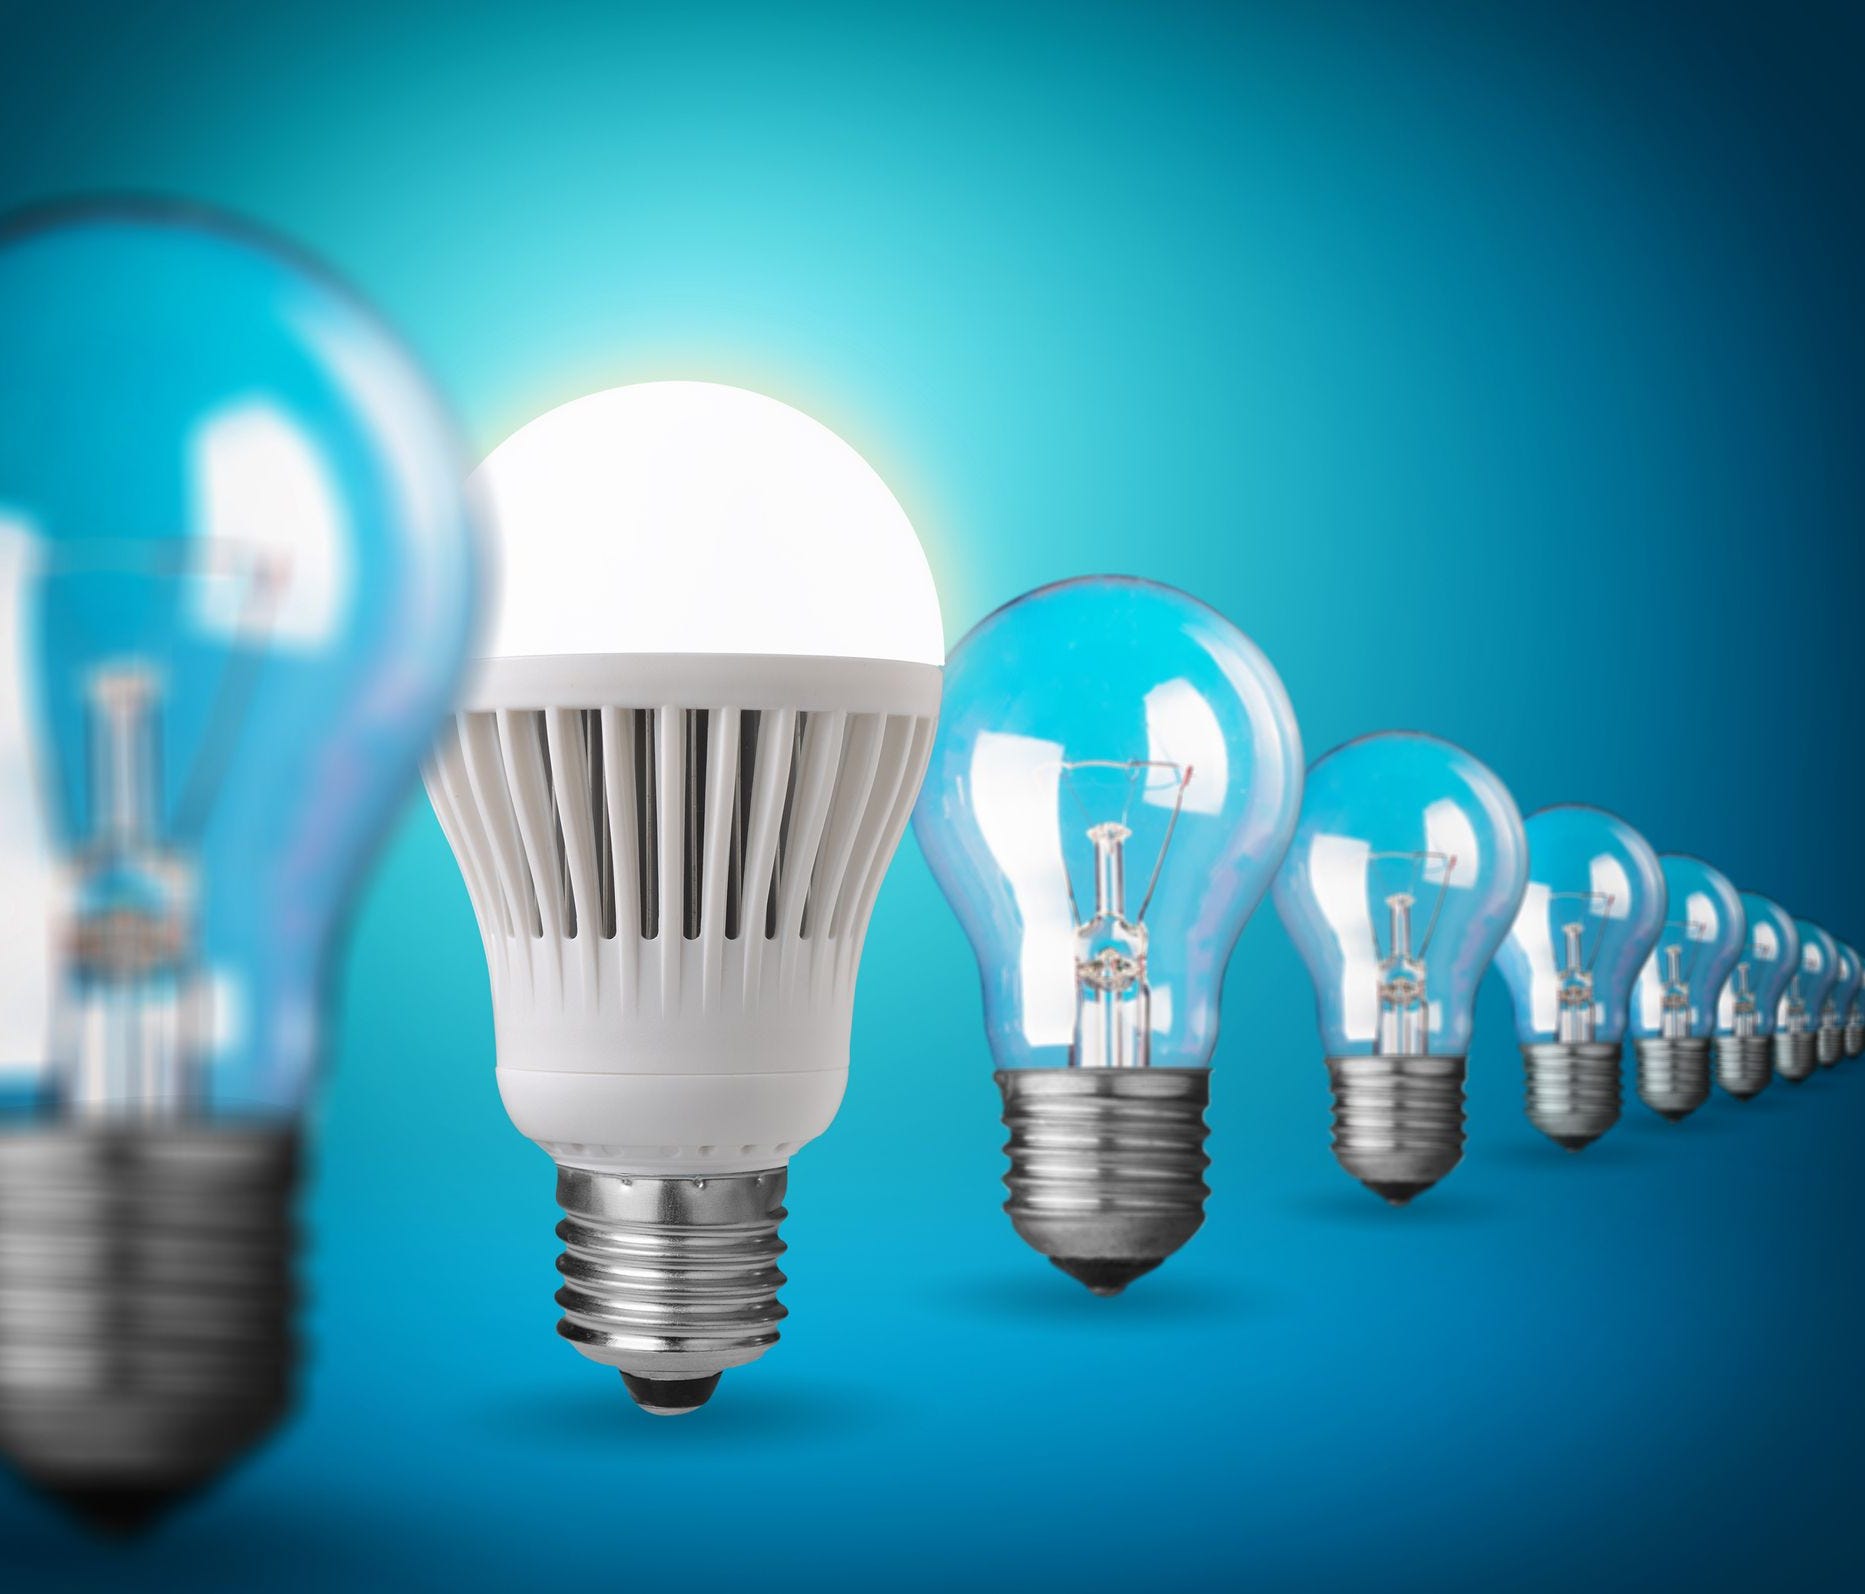 Switching to LED light bulbs can help the typical home save about a $1,000 over a 10-year period. That's roughly $8.33 a month.